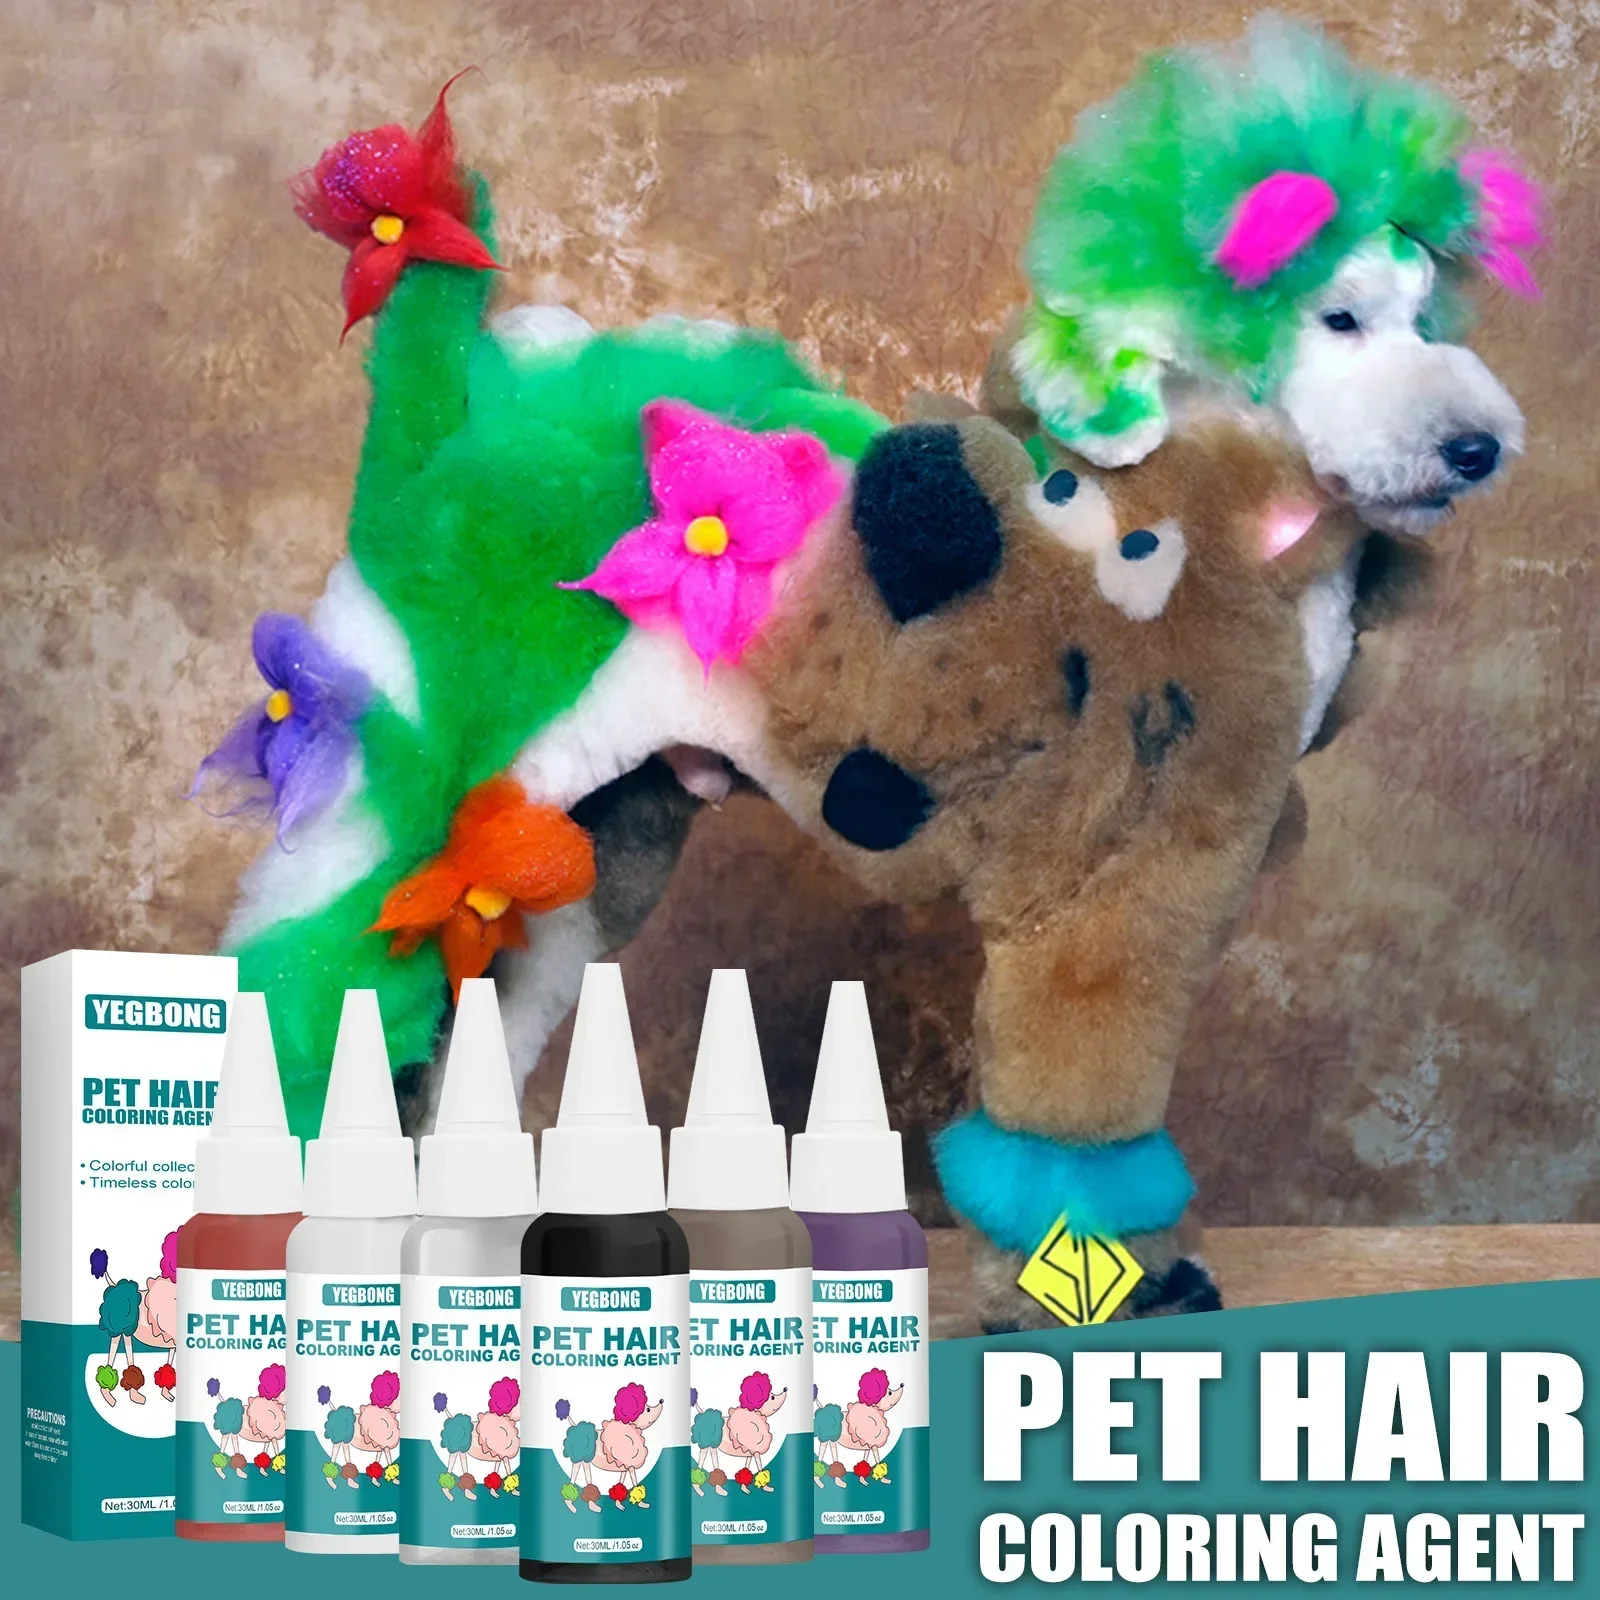 Semi-permanent Animals Grooming Coloring Dyes Pigment Agent Supplies Pet Hair Dye Cream Dog Cat Bright Color Lasting japan pentel 30ml golden silver poster color degumming gouache pigment advertising paint calligraphy drawing supplies